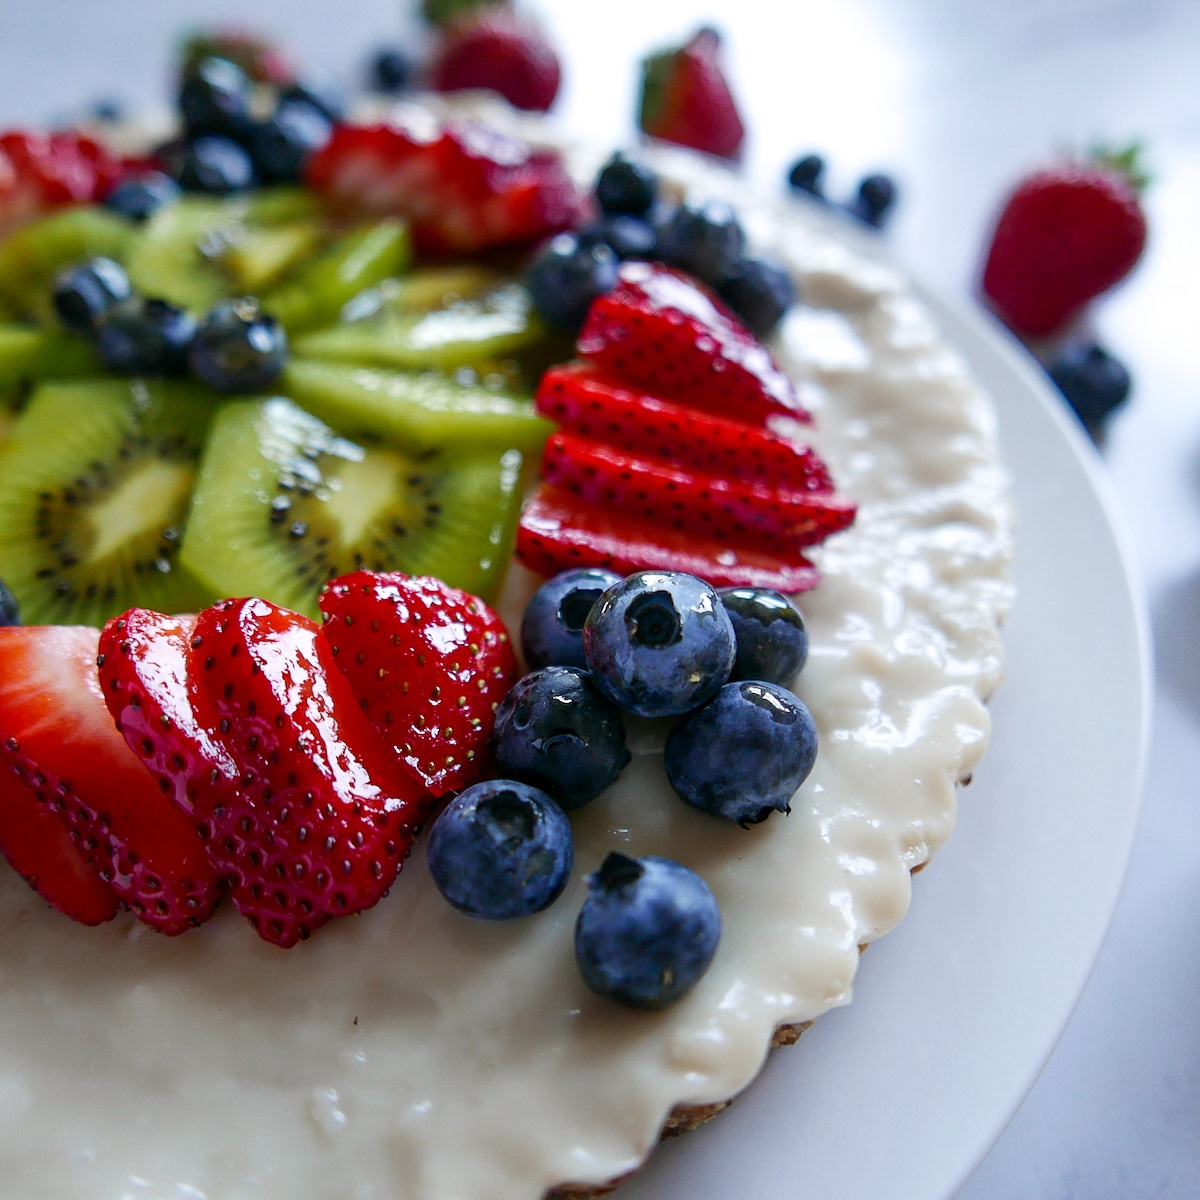 Fruit tart topped with berries and kiwi on a white platter with berries in the background.